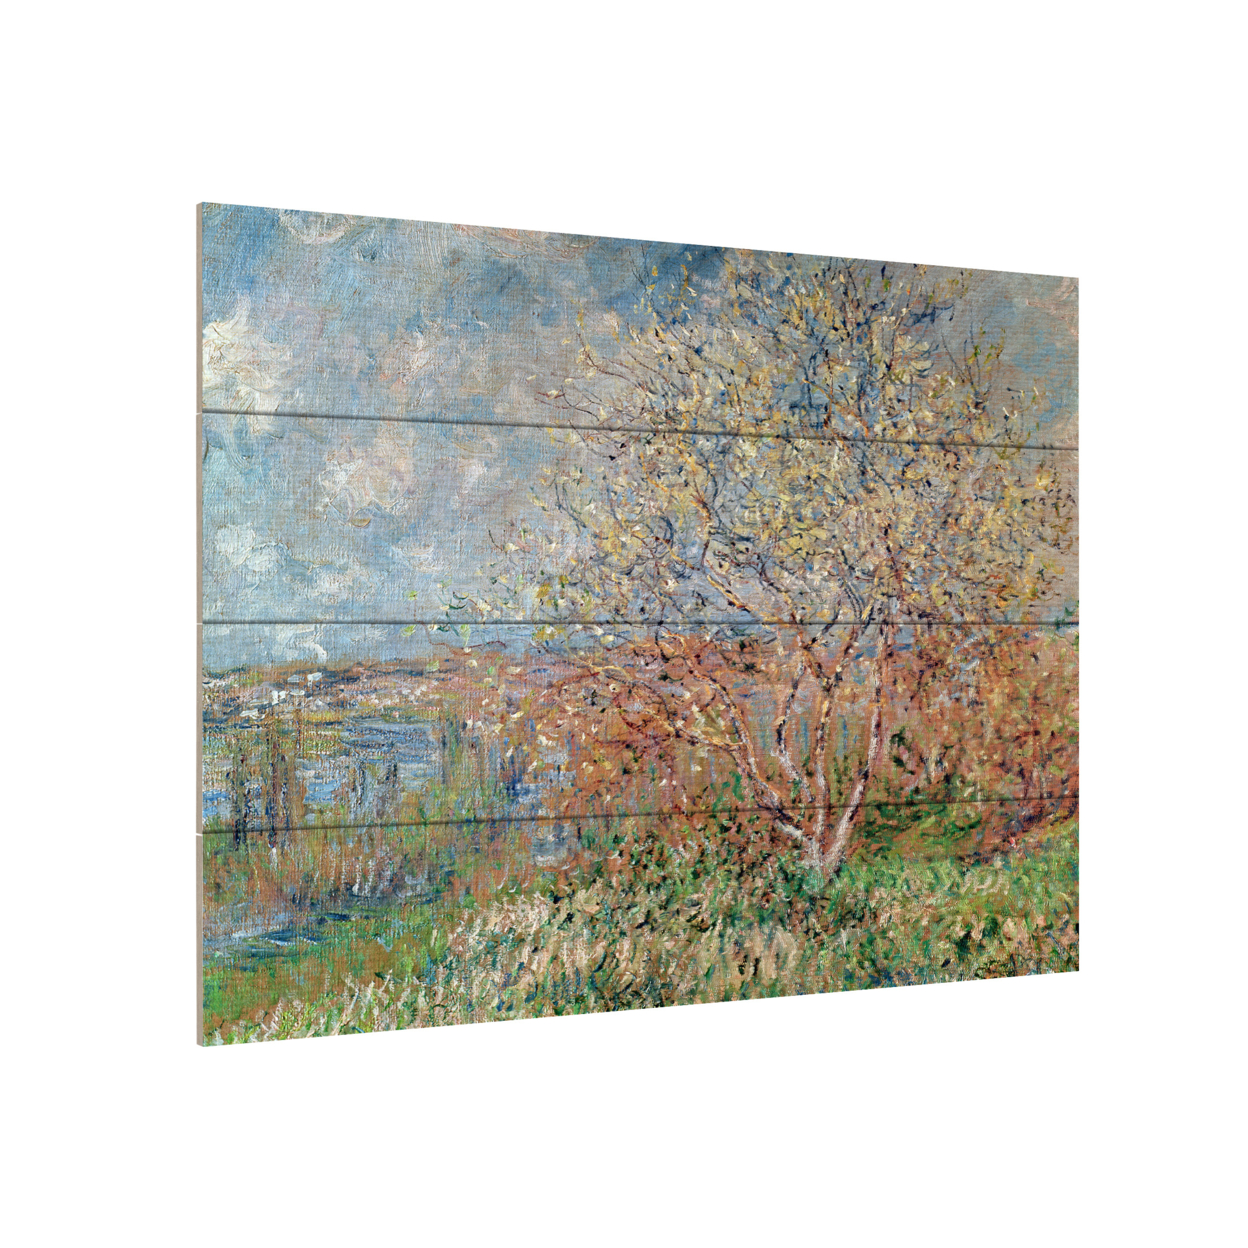 Wall Art 12 X 16 Inches Titled Spring 1880 Ready To Hang Printed On Wooden Planks